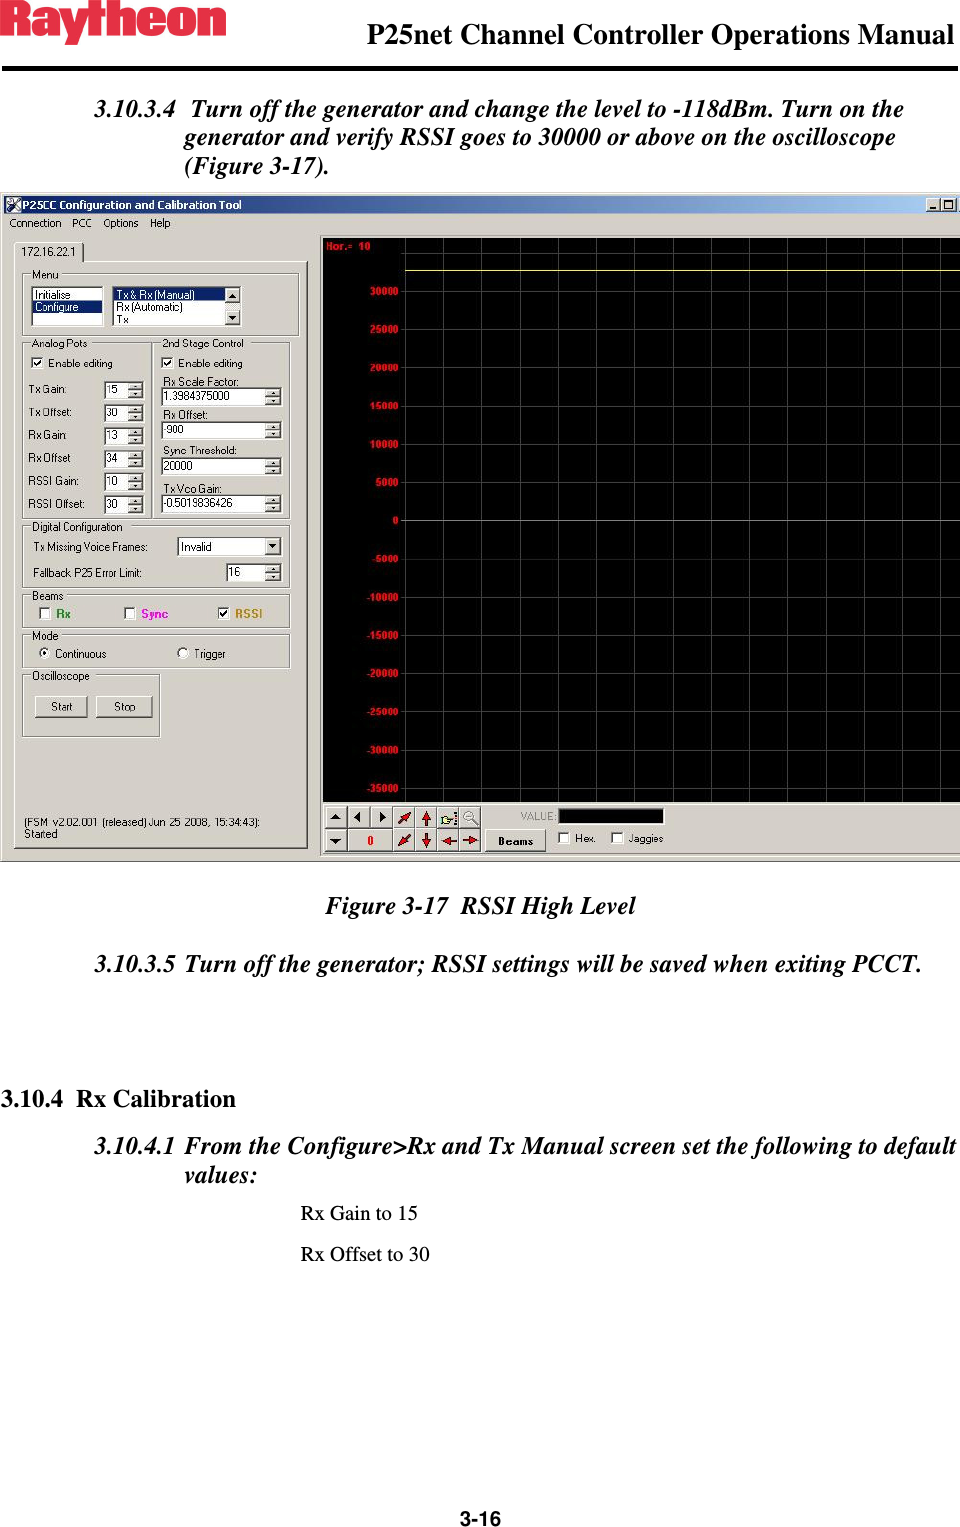                P25net Channel Controller Operations Manual                  3-16  3.10.3.4  Turn off the generator and change the level to -118dBm. Turn on the generator and verify RSSI goes to 30000 or above on the oscilloscope (Figure 3-17).  Figure 3-17  RSSI High Level 3.10.3.5 Turn off the generator; RSSI settings will be saved when exiting PCCT.   3.10.4 Rx Calibration 3.10.4.1 From the Configure&gt;Rx and Tx Manual screen set the following to default values: Rx Gain to 15 Rx Offset to 30 